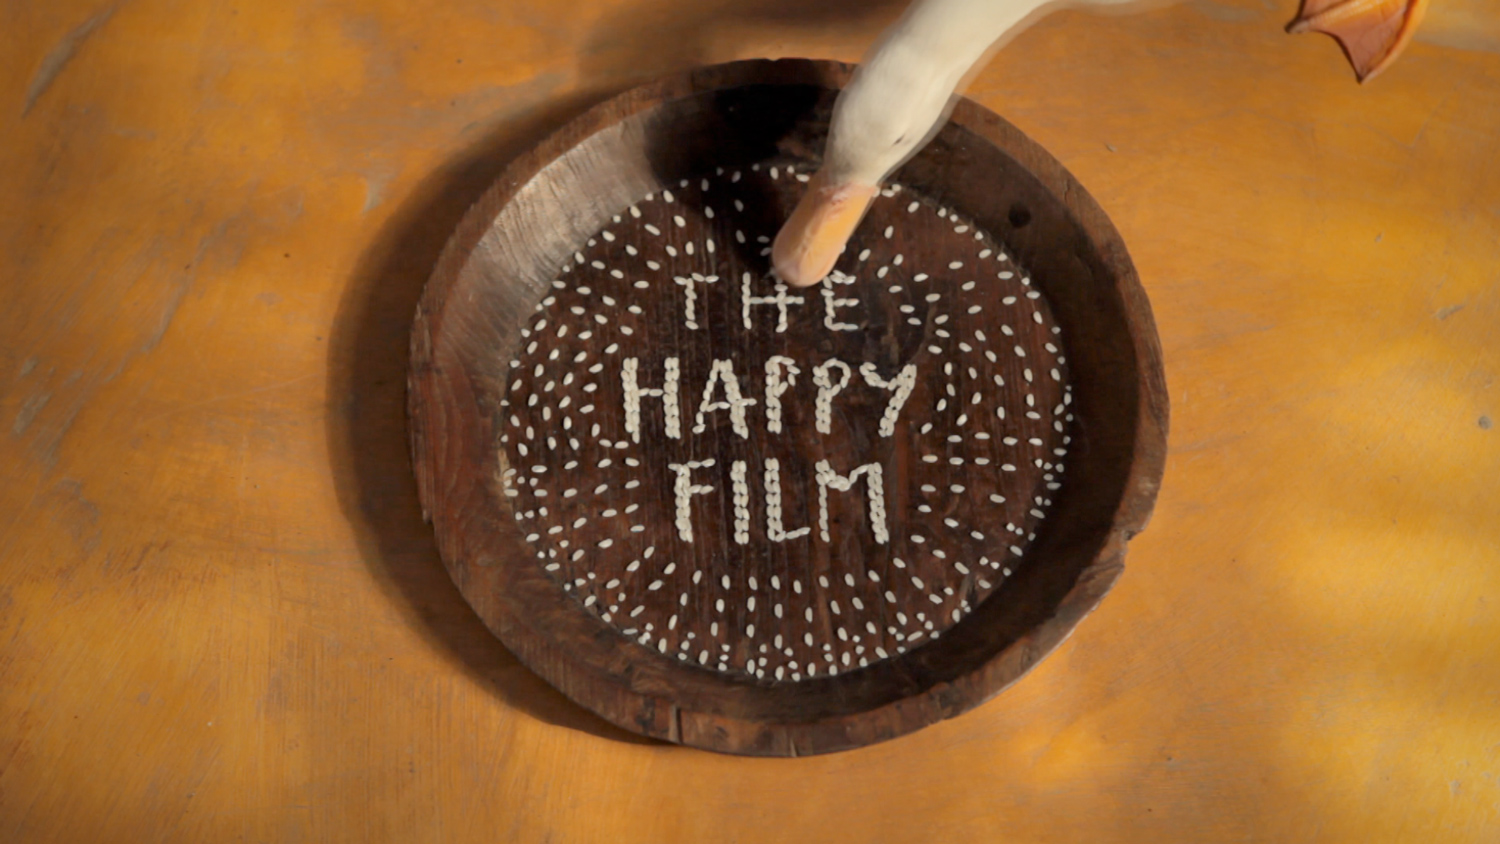 The Happy Film by Stefan Sagmeister and Ben Nabors